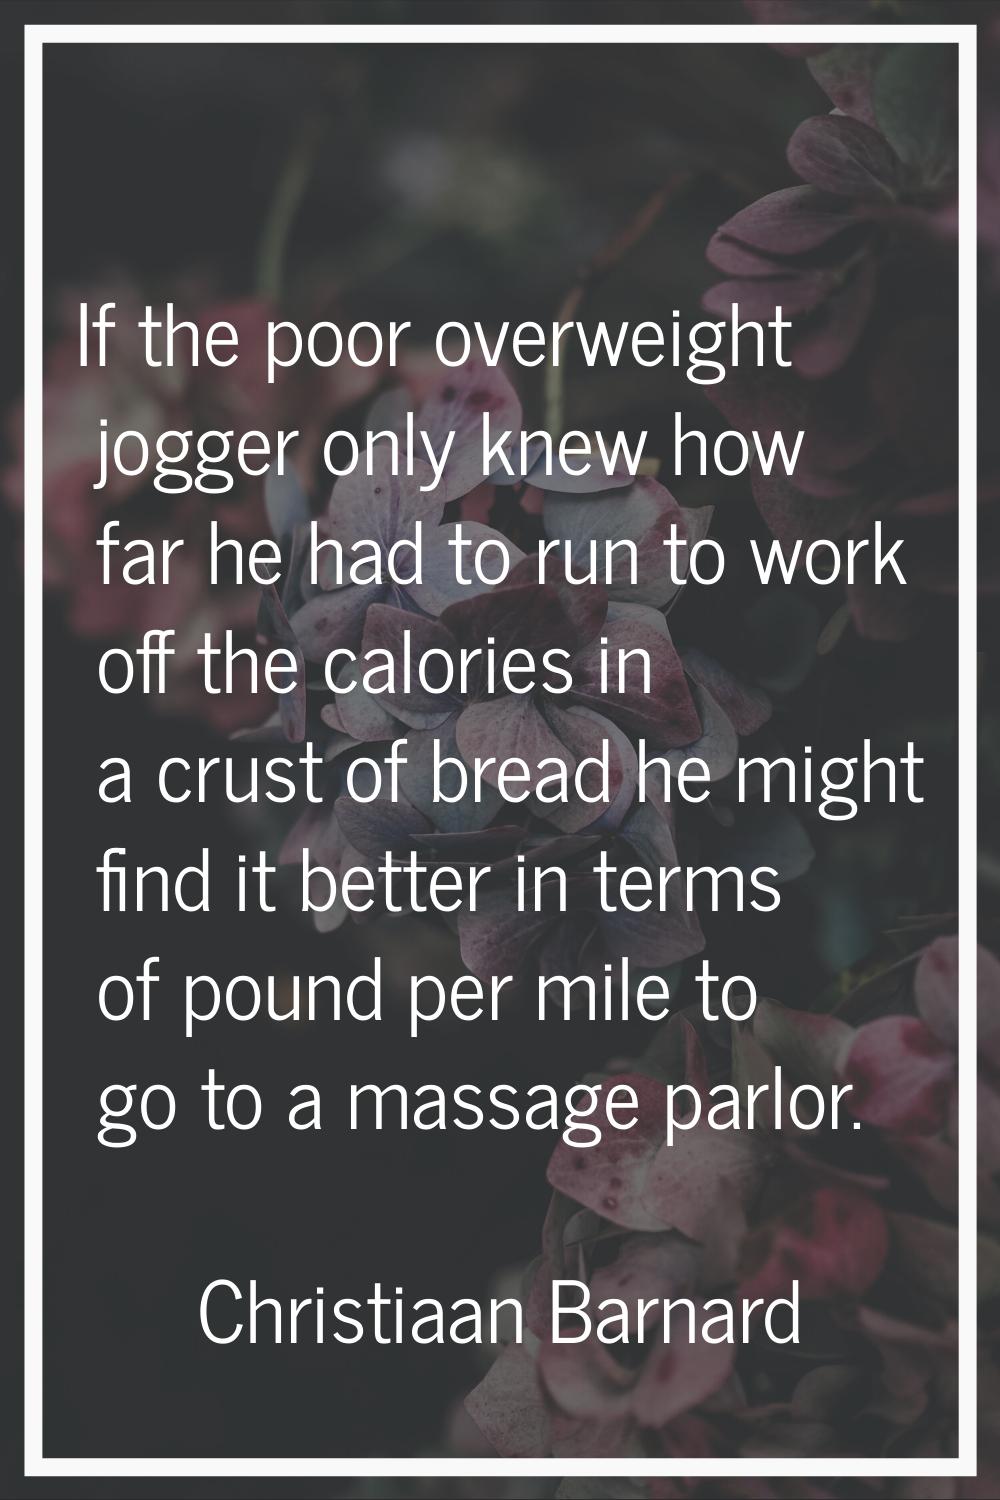 If the poor overweight jogger only knew how far he had to run to work off the calories in a crust o